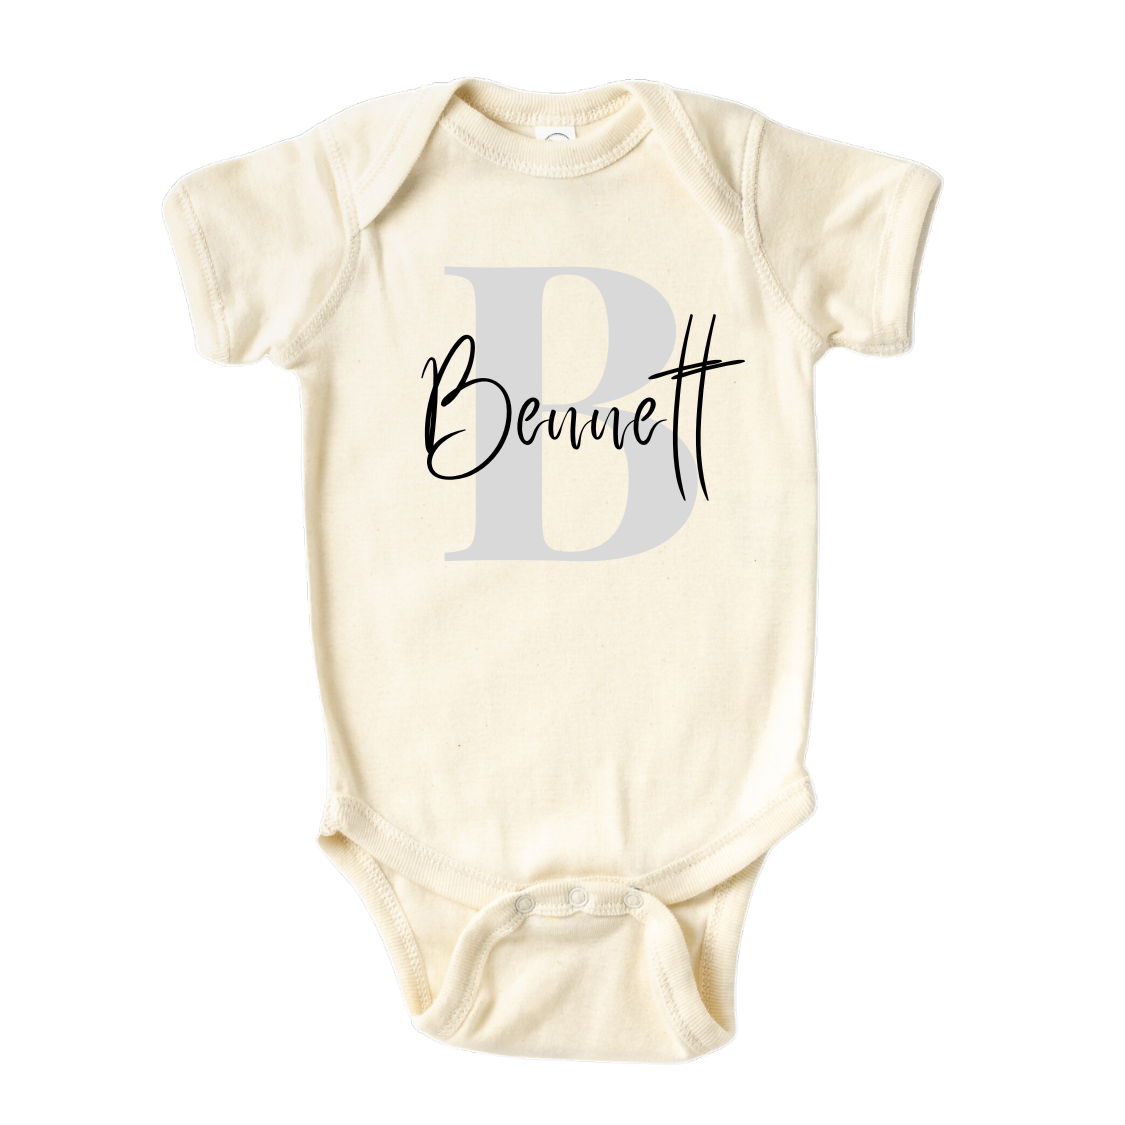 Natural Baby Onesie with grey initial design and customizable name.